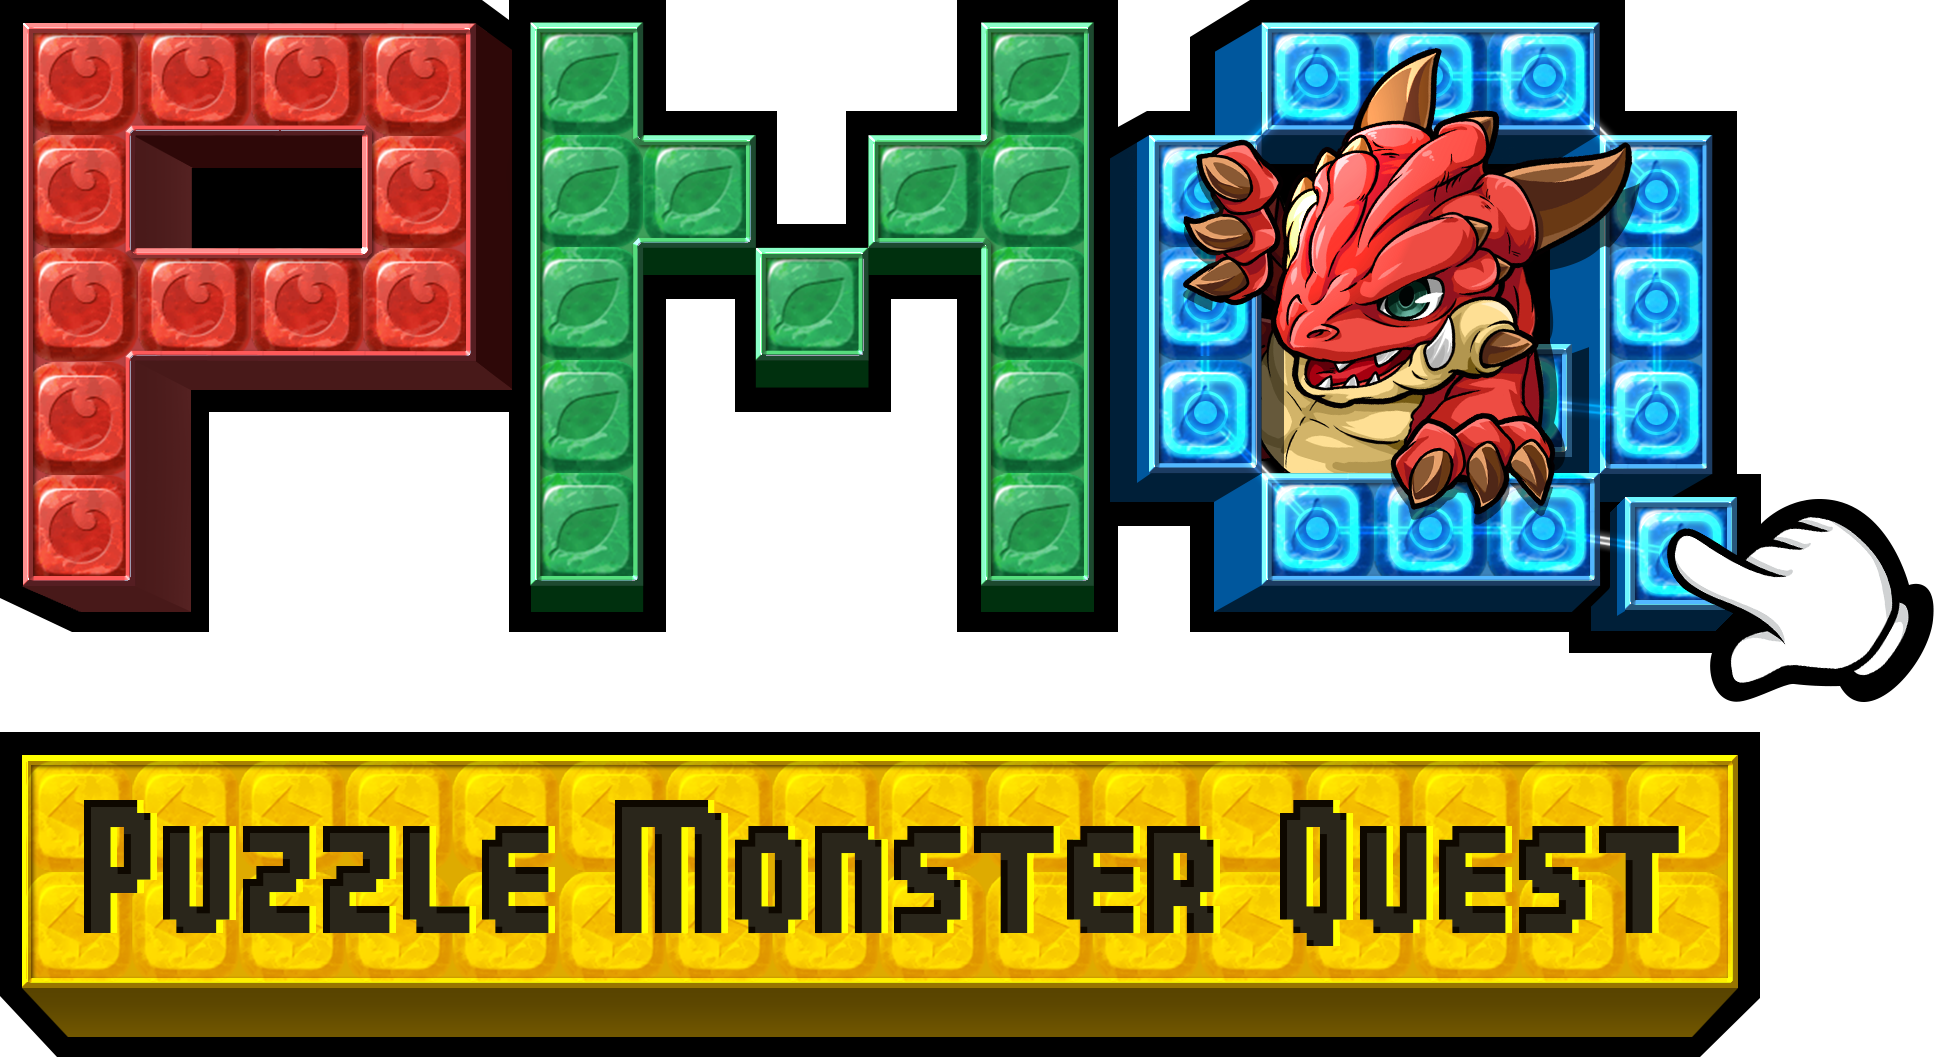 MonsterQuest Review: The MonsterQuest Search for the Last Living